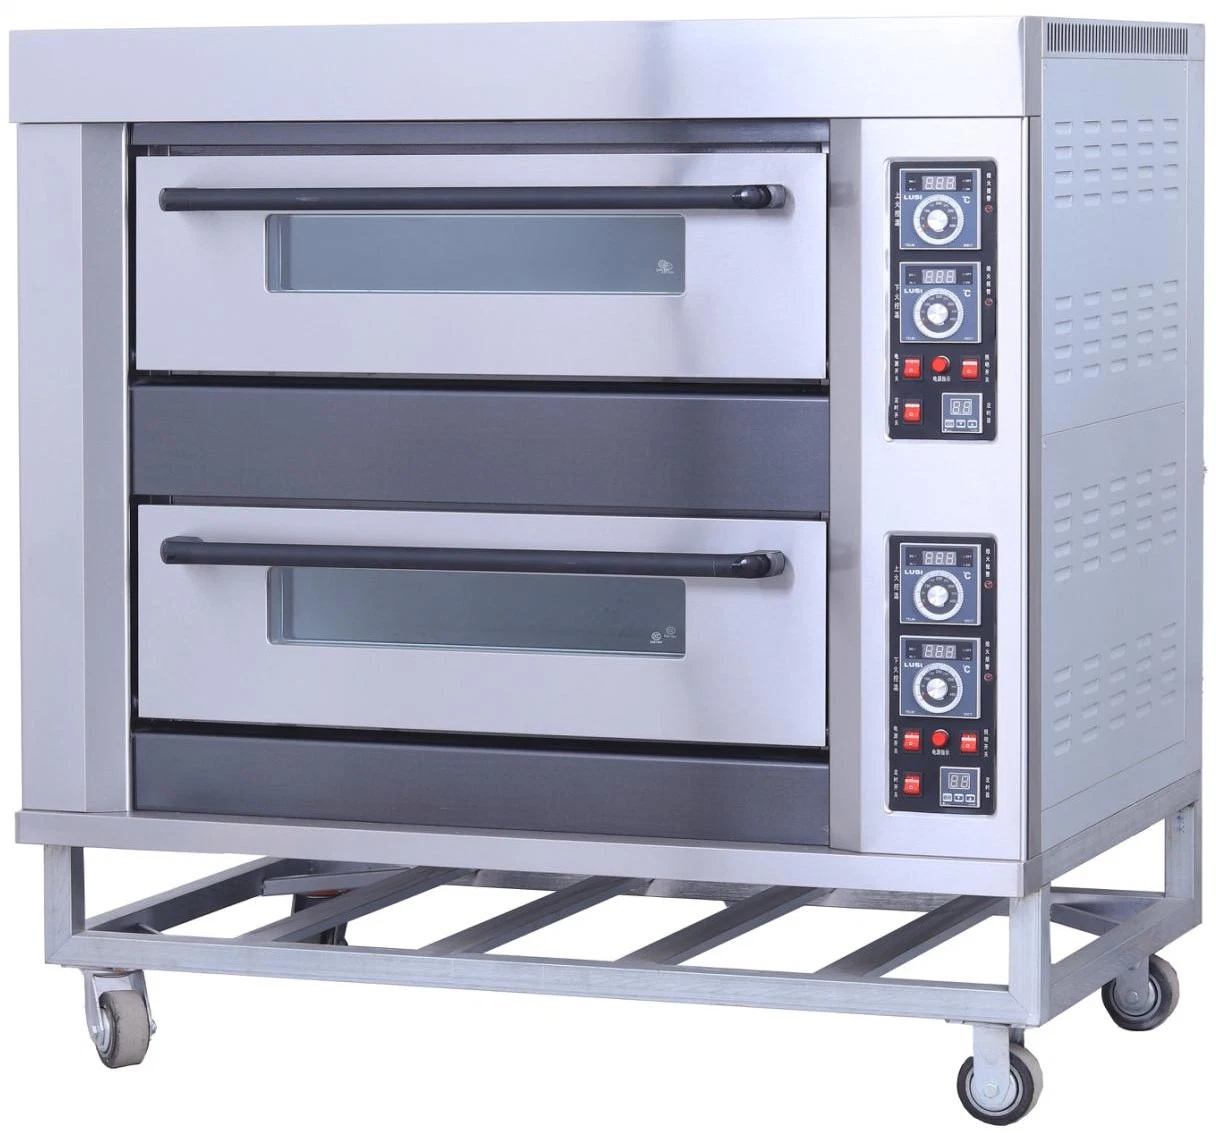 Commercial Industrial Food Baking Equipment Machine Machinery Price Big 1 2 3 4 Deck Gas Electric Cake Horno Pizza Toaster Bread Bakery Baking Oven